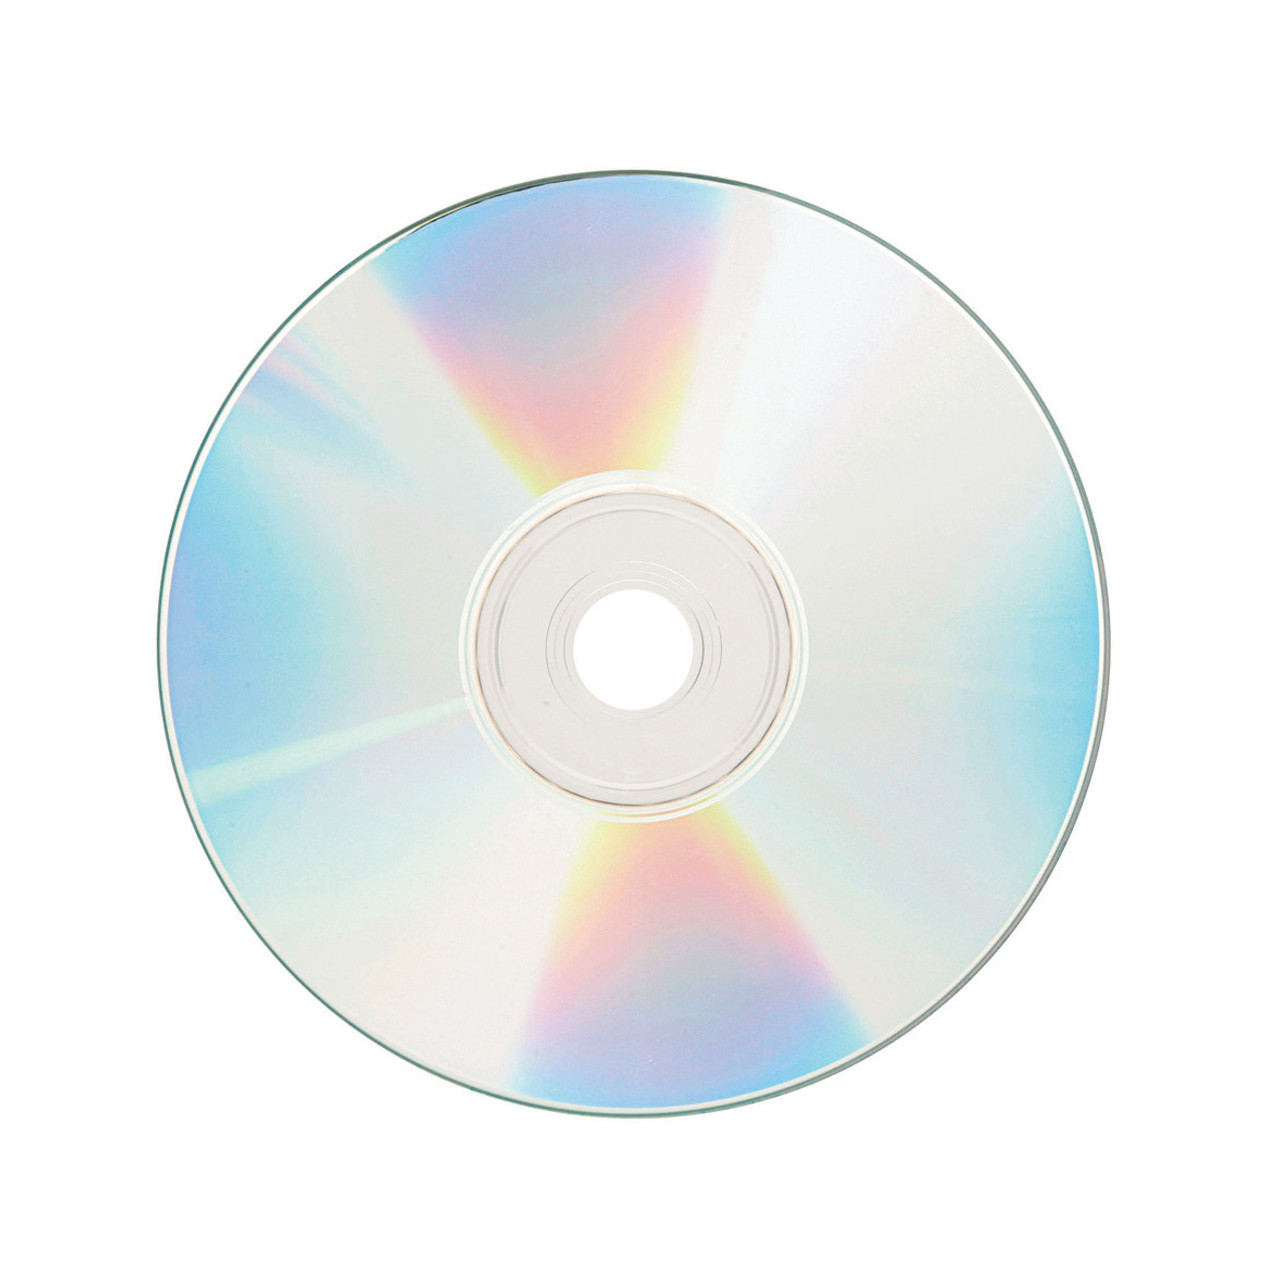 Factory Wholesale 700mb/80min 52x CD-R Shiny Silver Top Blank Recordable  Media Disc